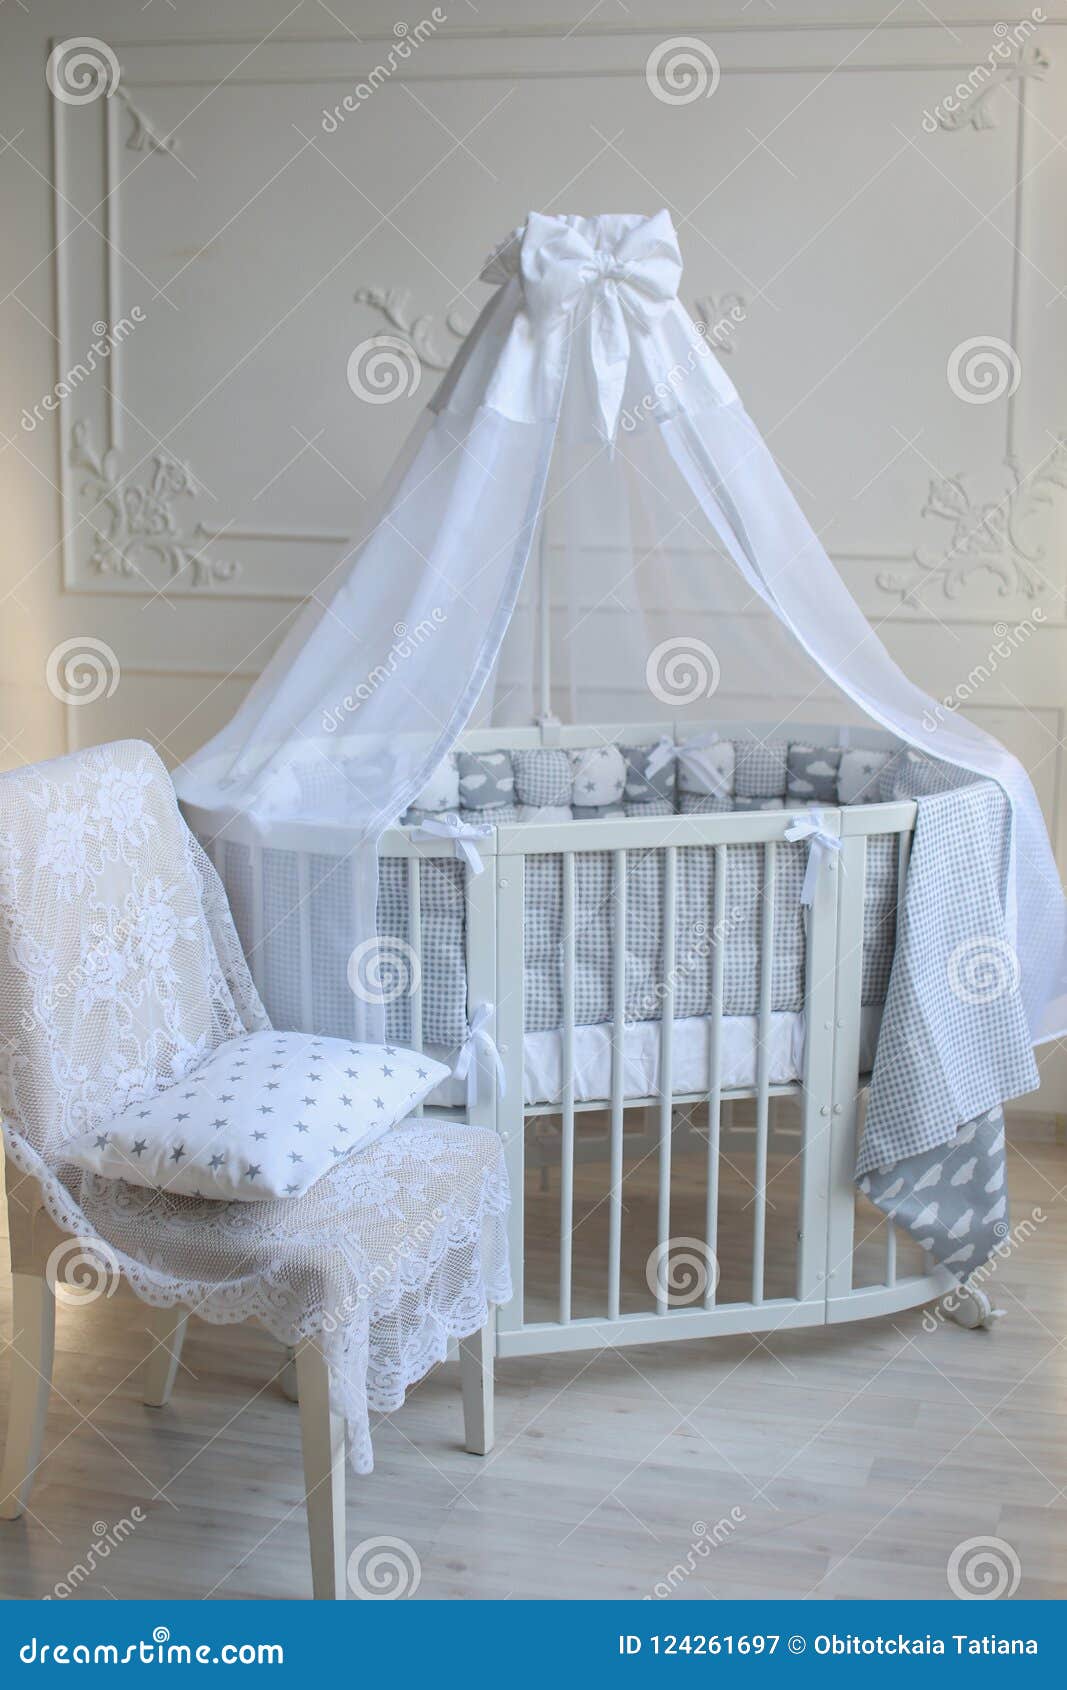 oval cribs for babies